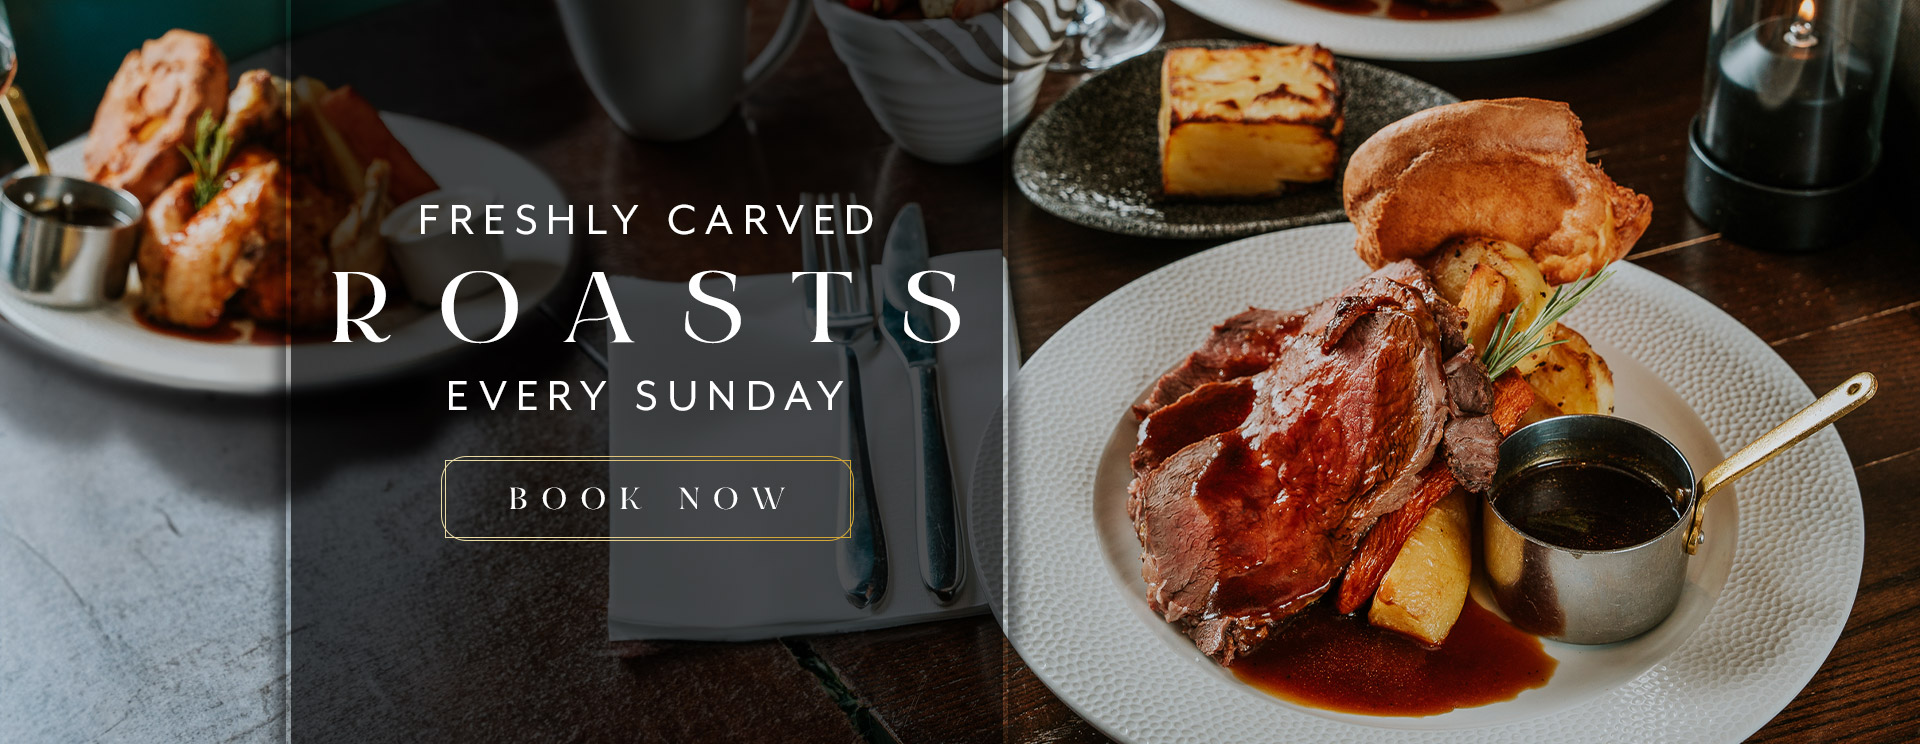 Sunday Lunch at The Willett Arms